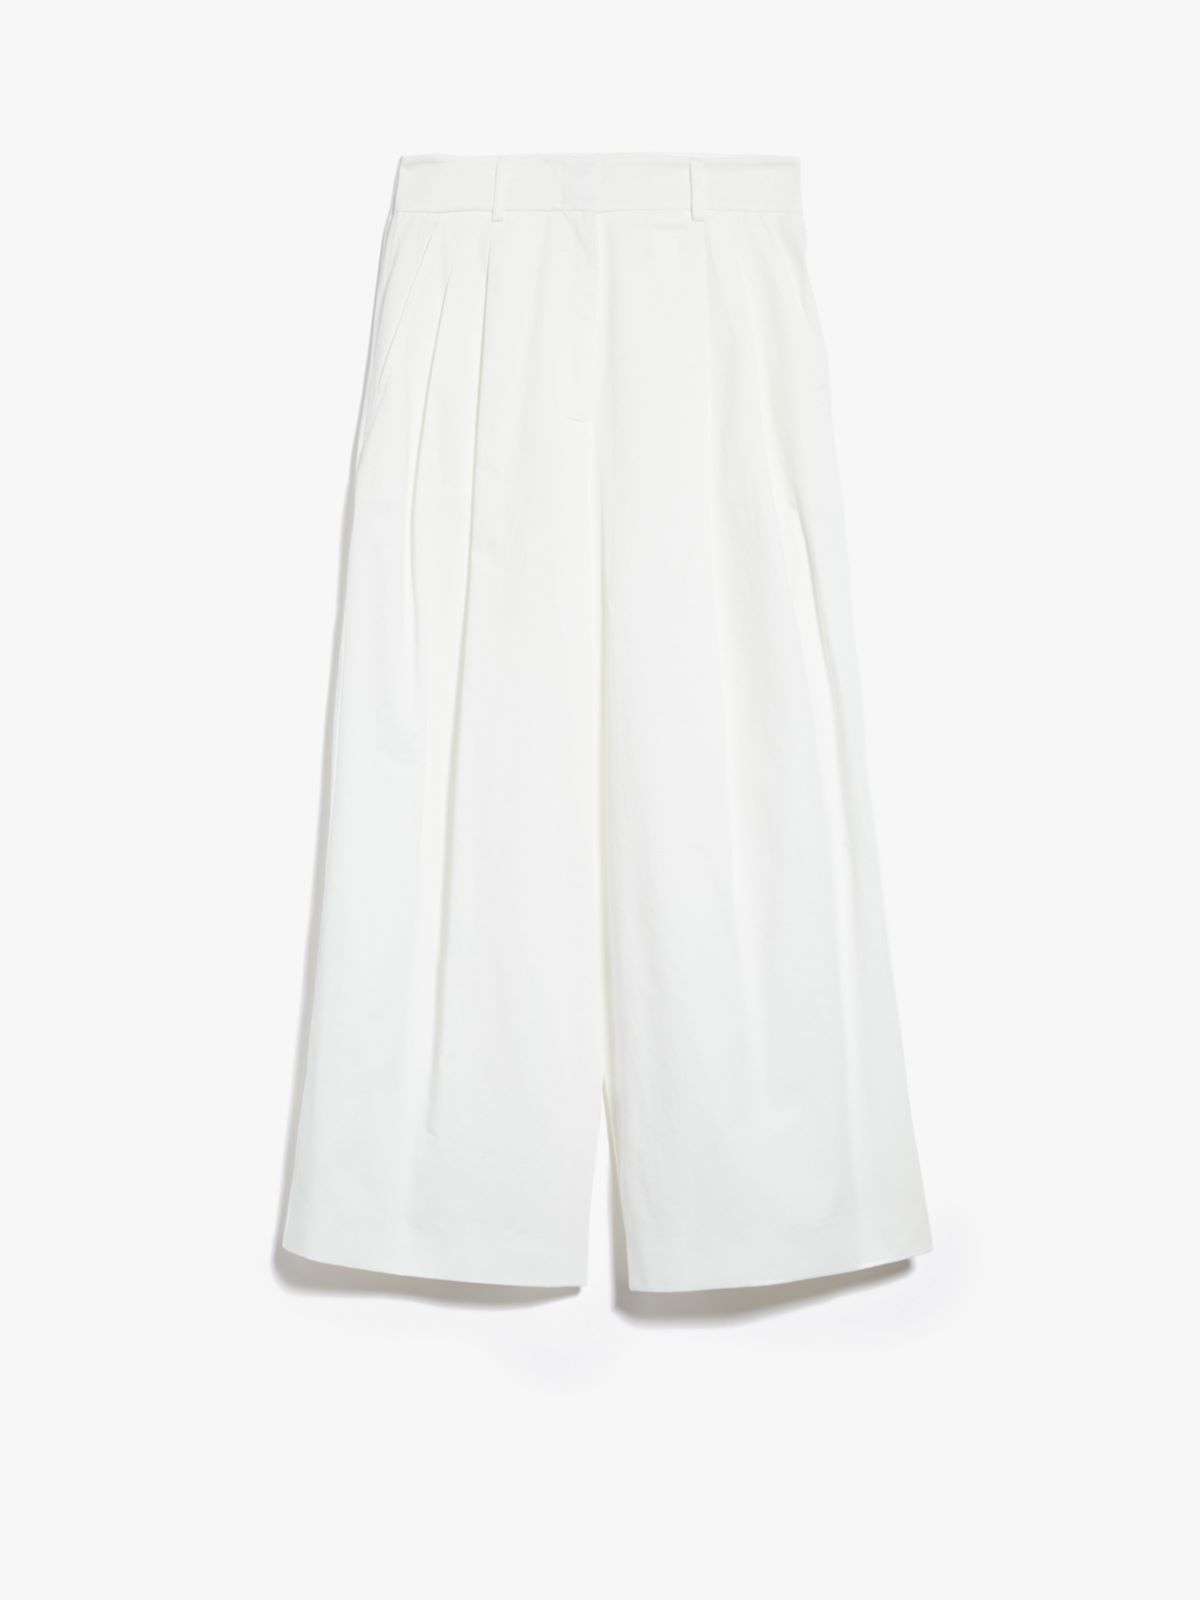 Trousers in cotton satin - WHITE - Weekend Max Mara - 5